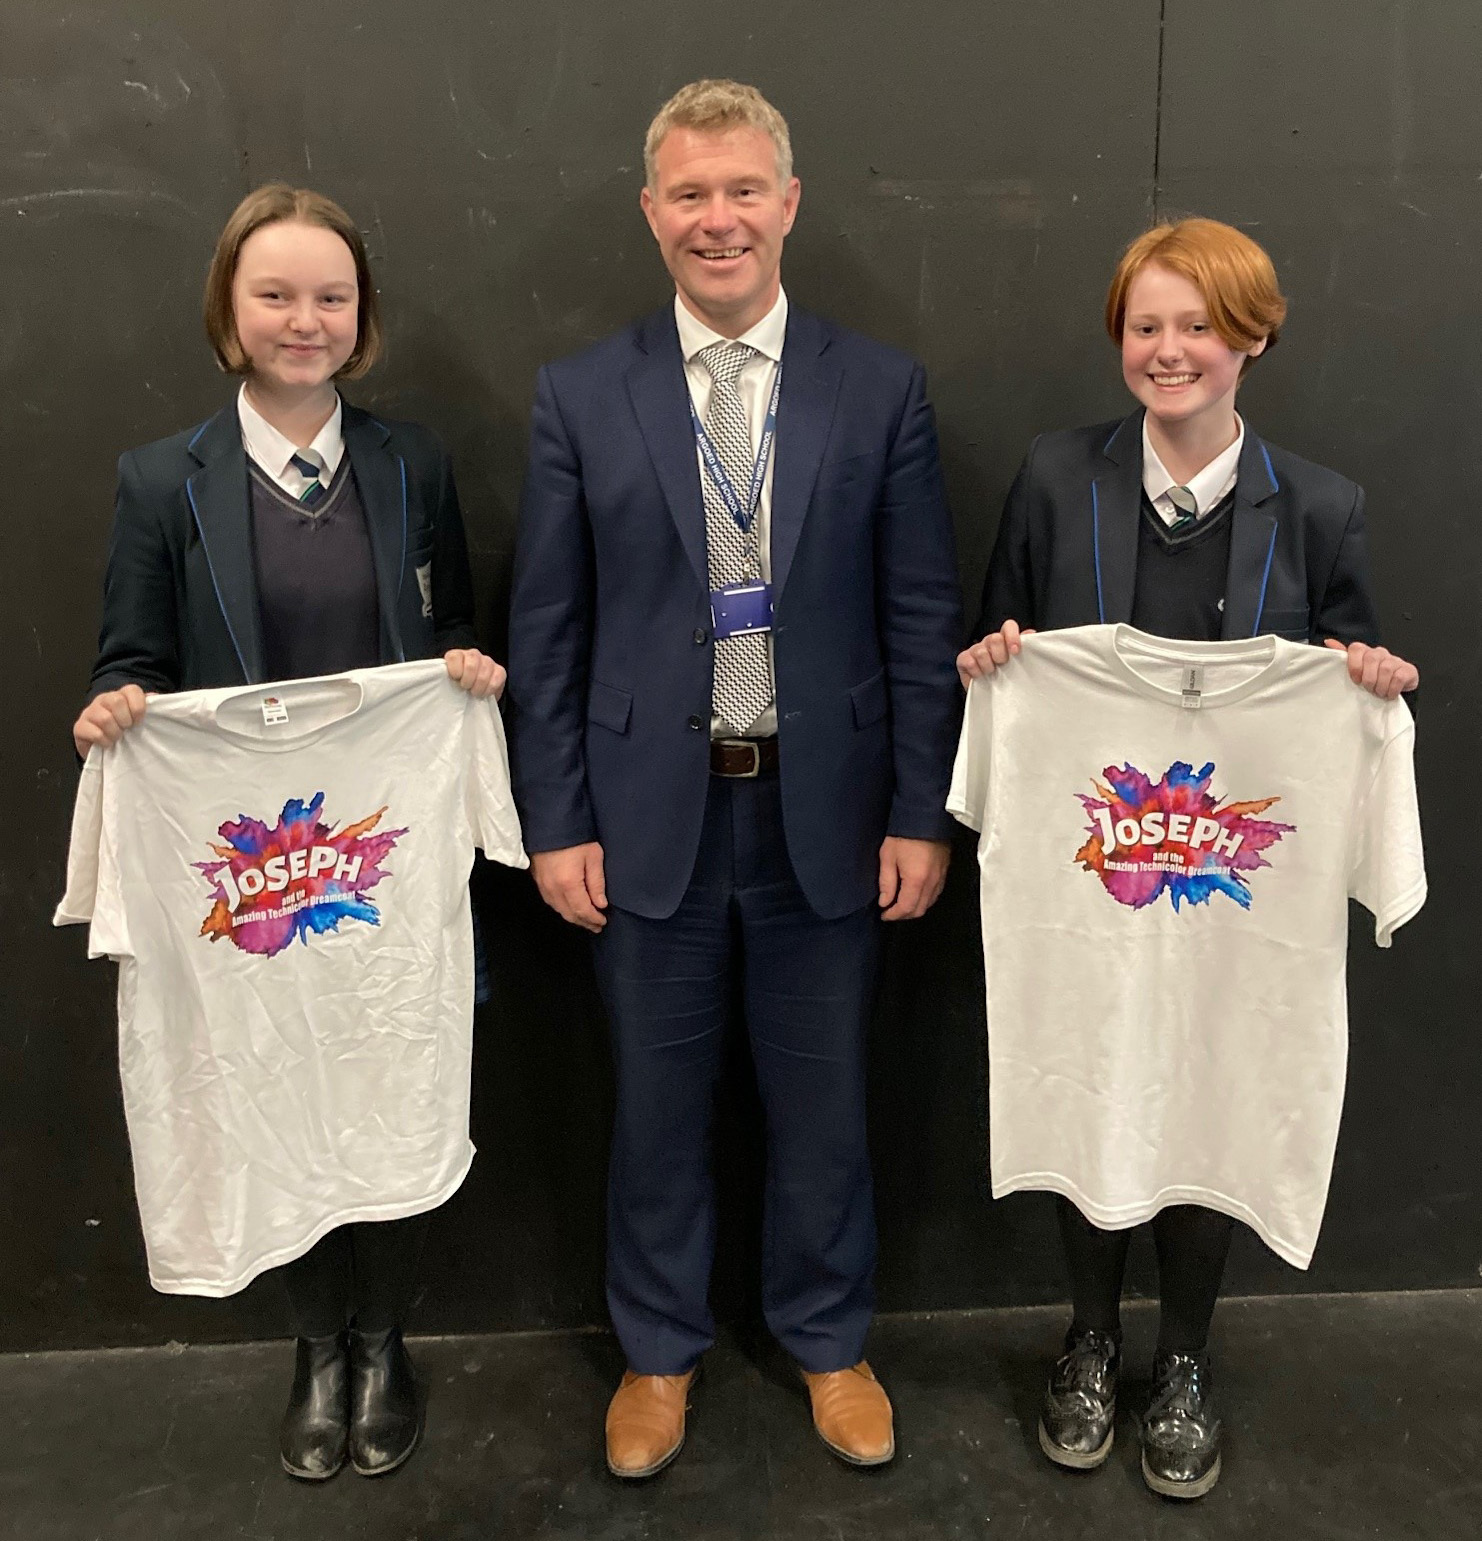 Niamh Howes-Patterson and Emily Baines are congratulated by their headteacher, Paul Smith, after their performance in Joseph and the Amazing Technicolour Dreamcoat.